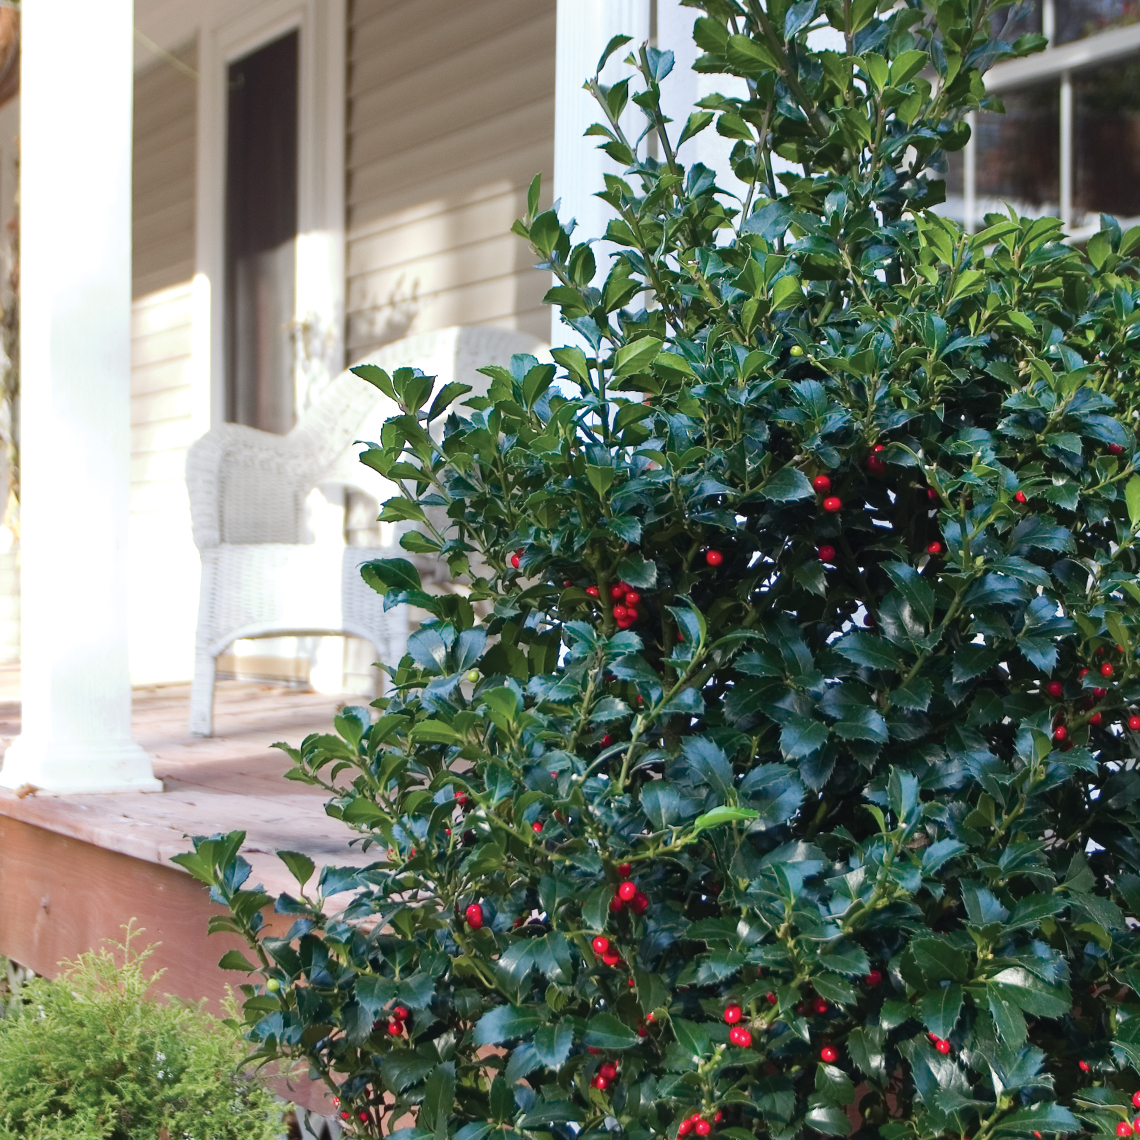 Specimen of Castle Spire blue holly planted next to residential porch